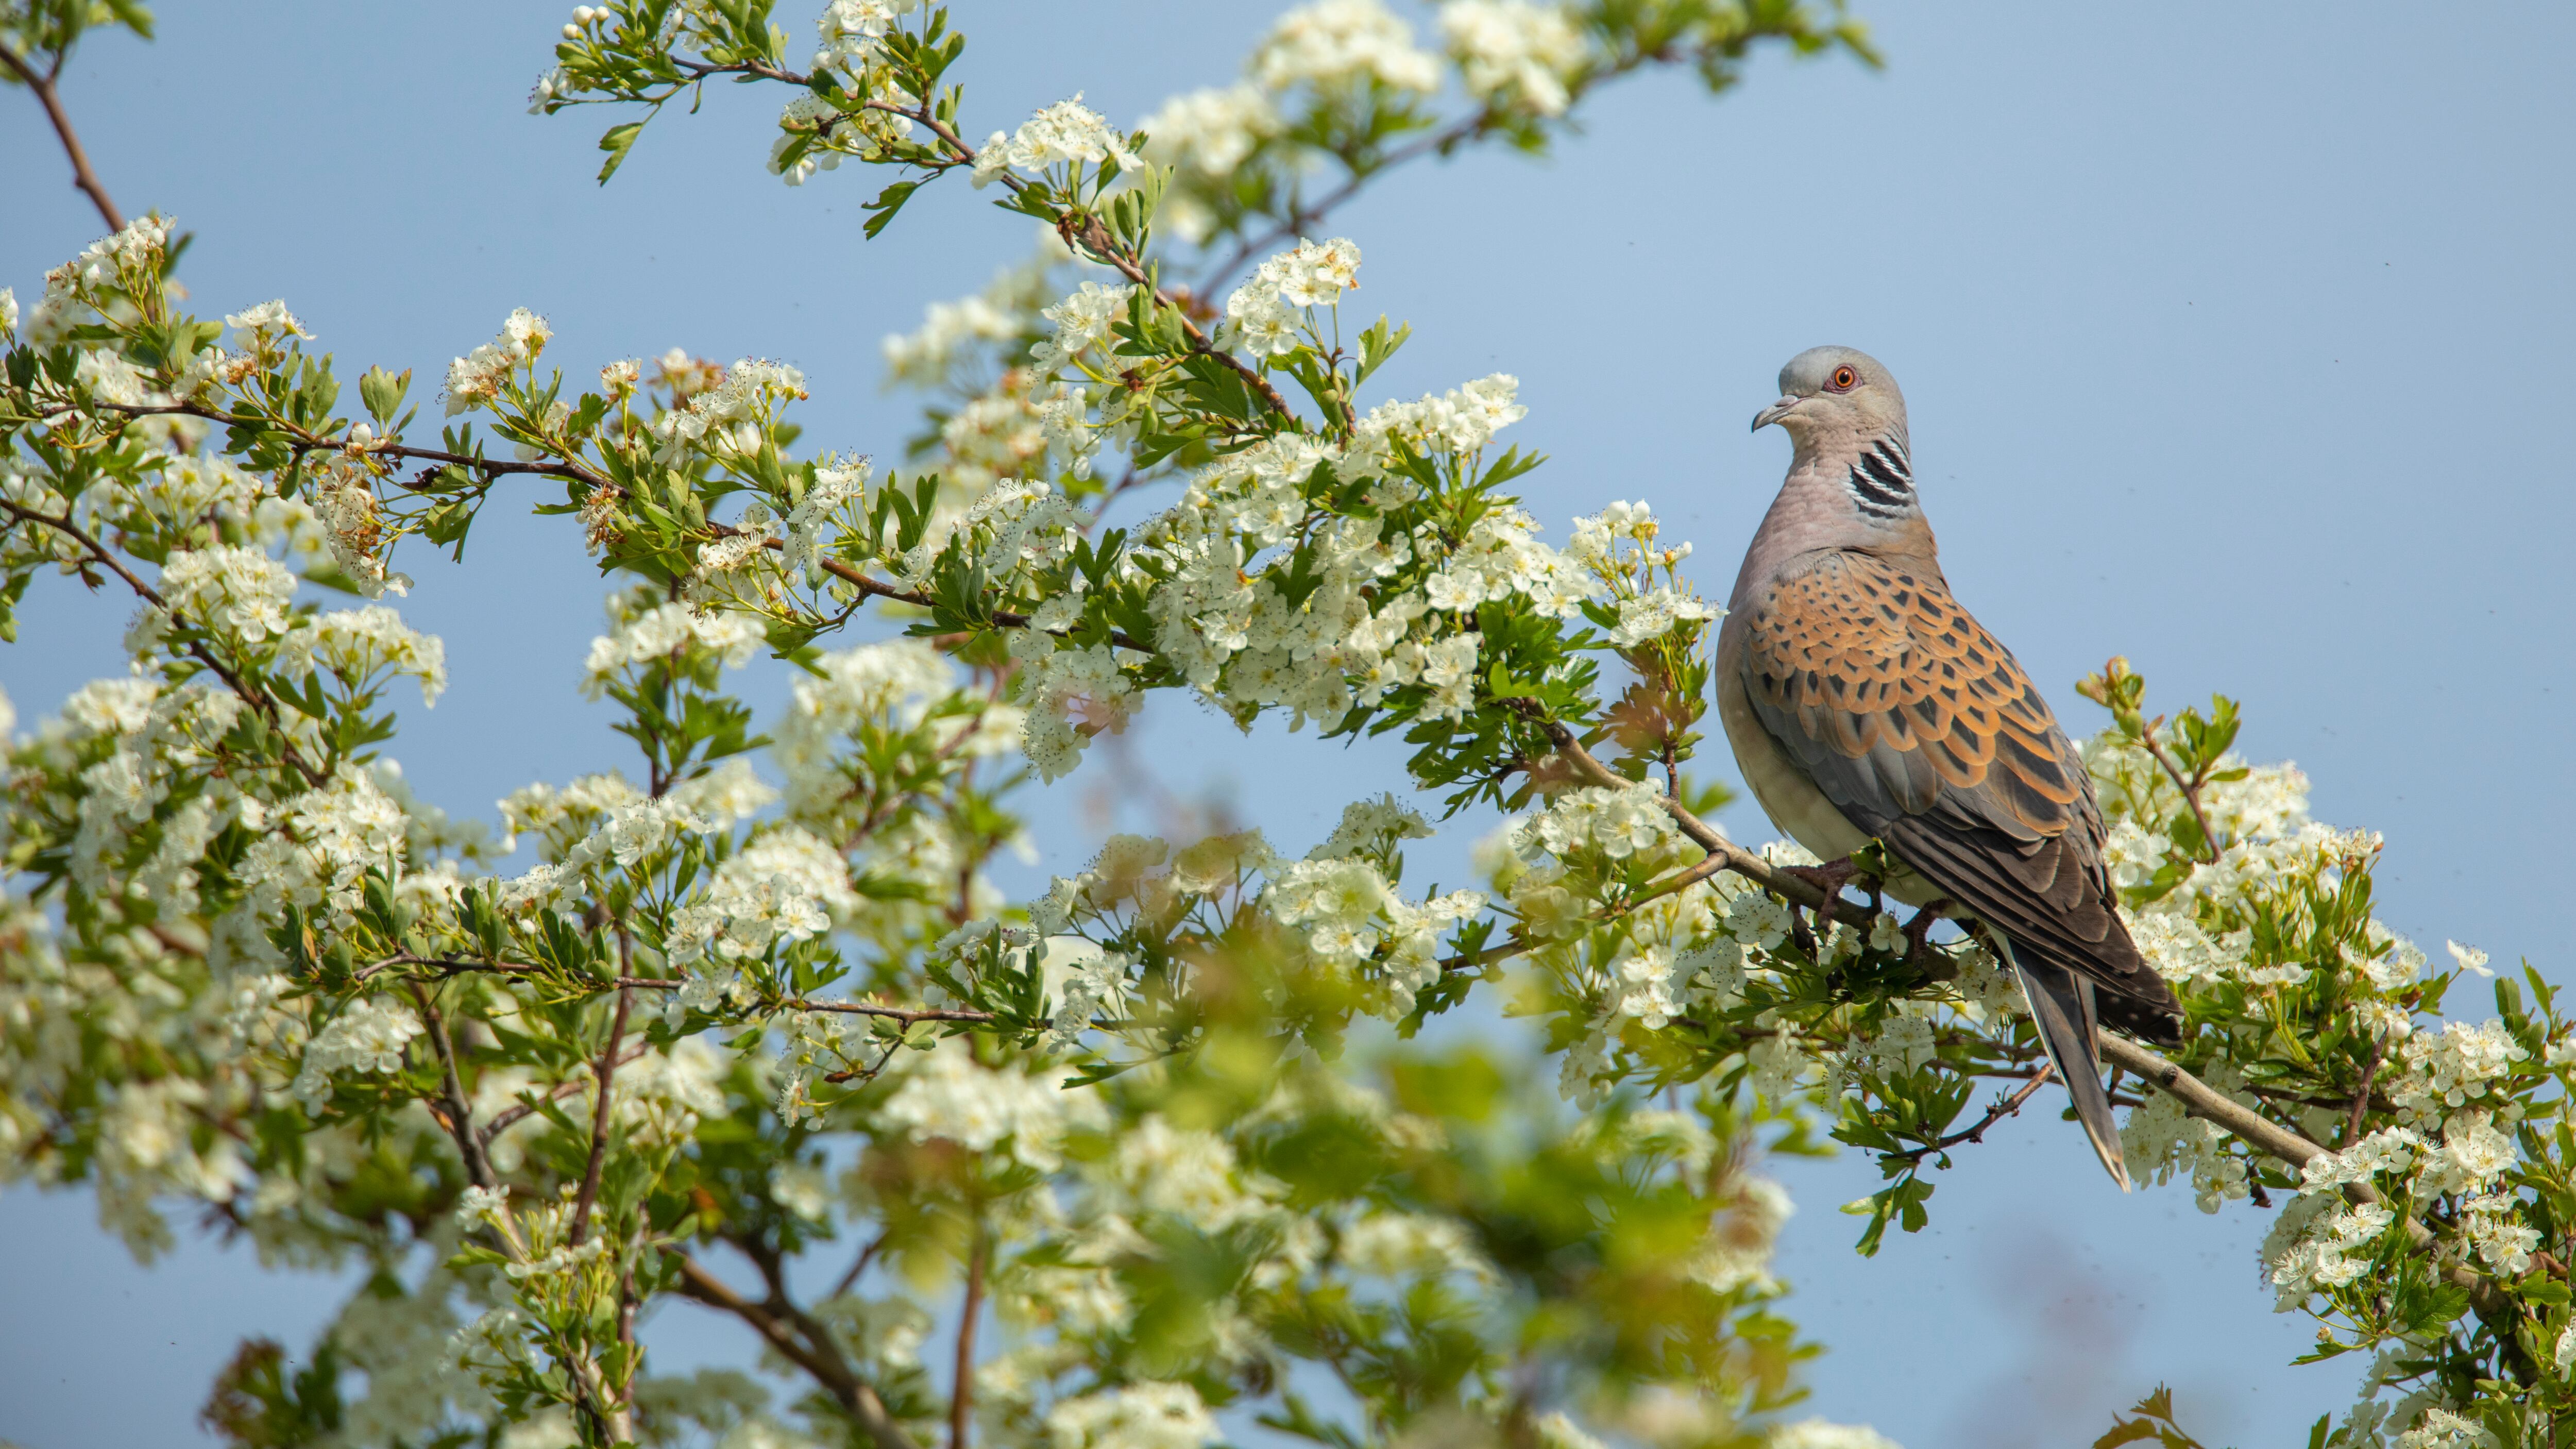 The turtle dove’s purring call was once common in the British countryside